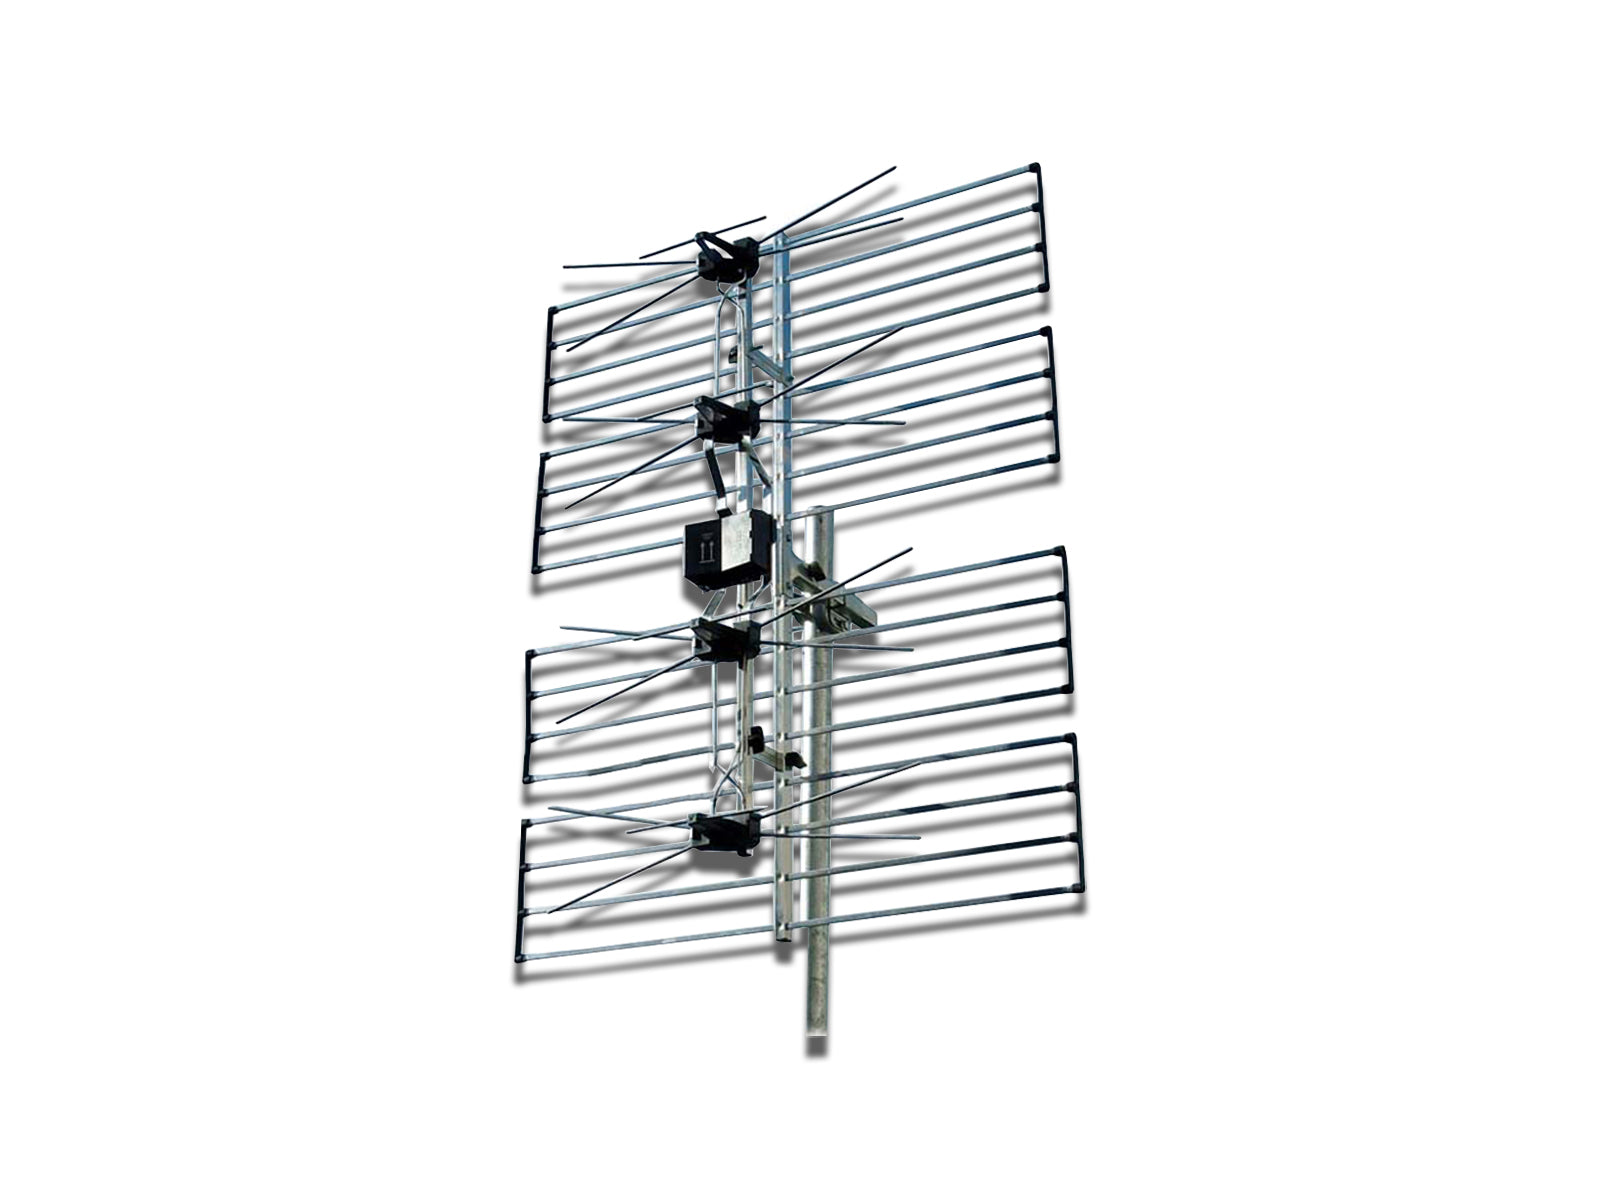 Front View Image of The TV Aerial Wideband Grid UHF on The White Background